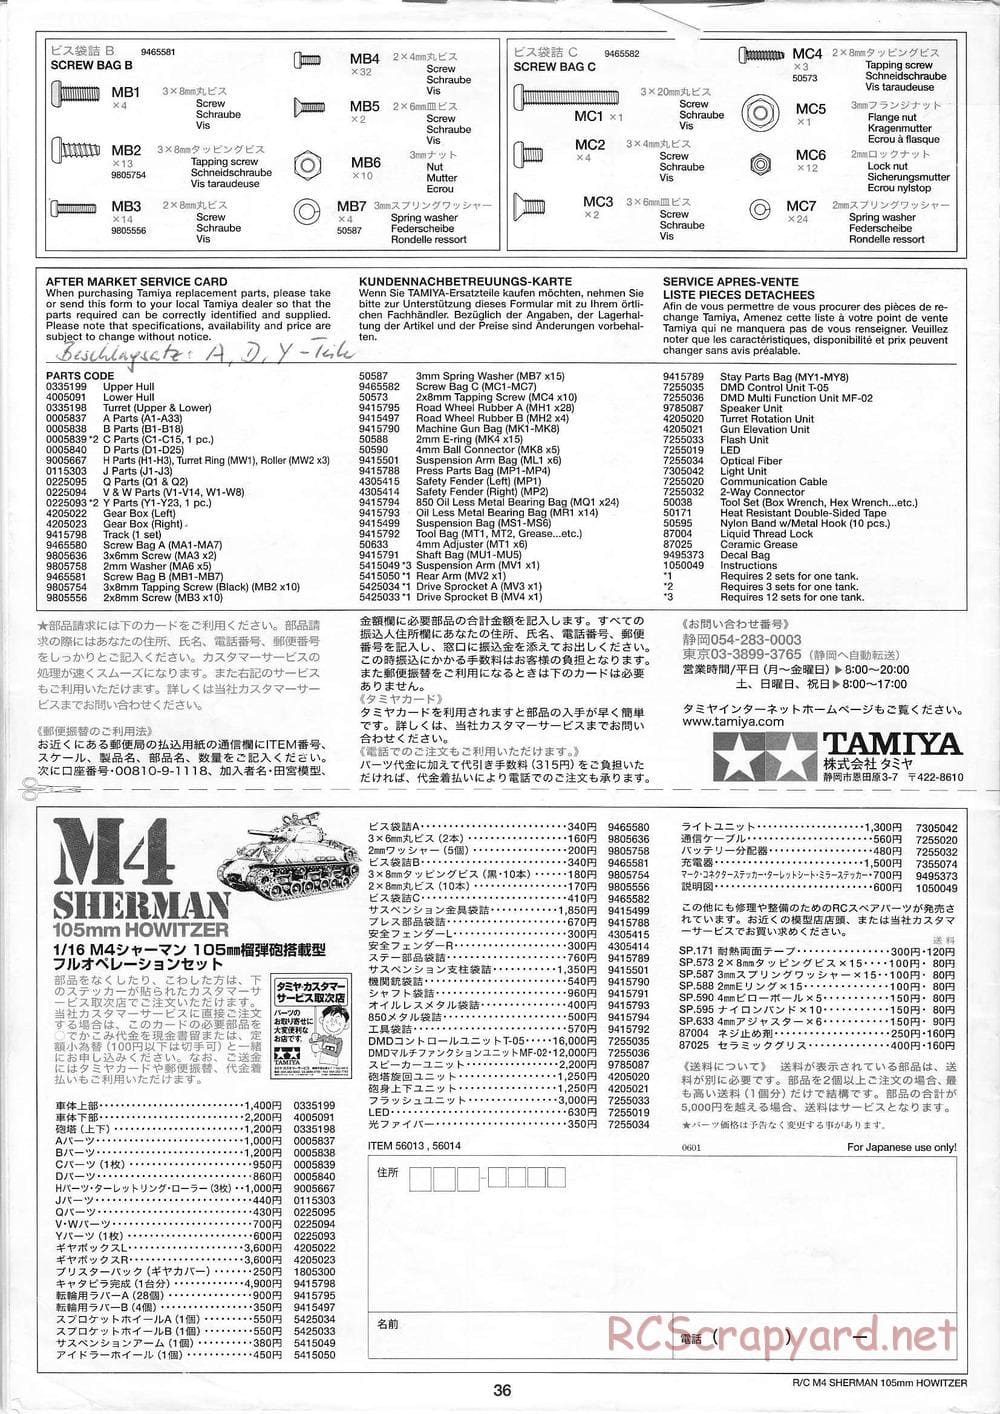 Tamiya - M4 Sherman 105mm Howitzer - 1/16 Scale Chassis - Manual - Page 39